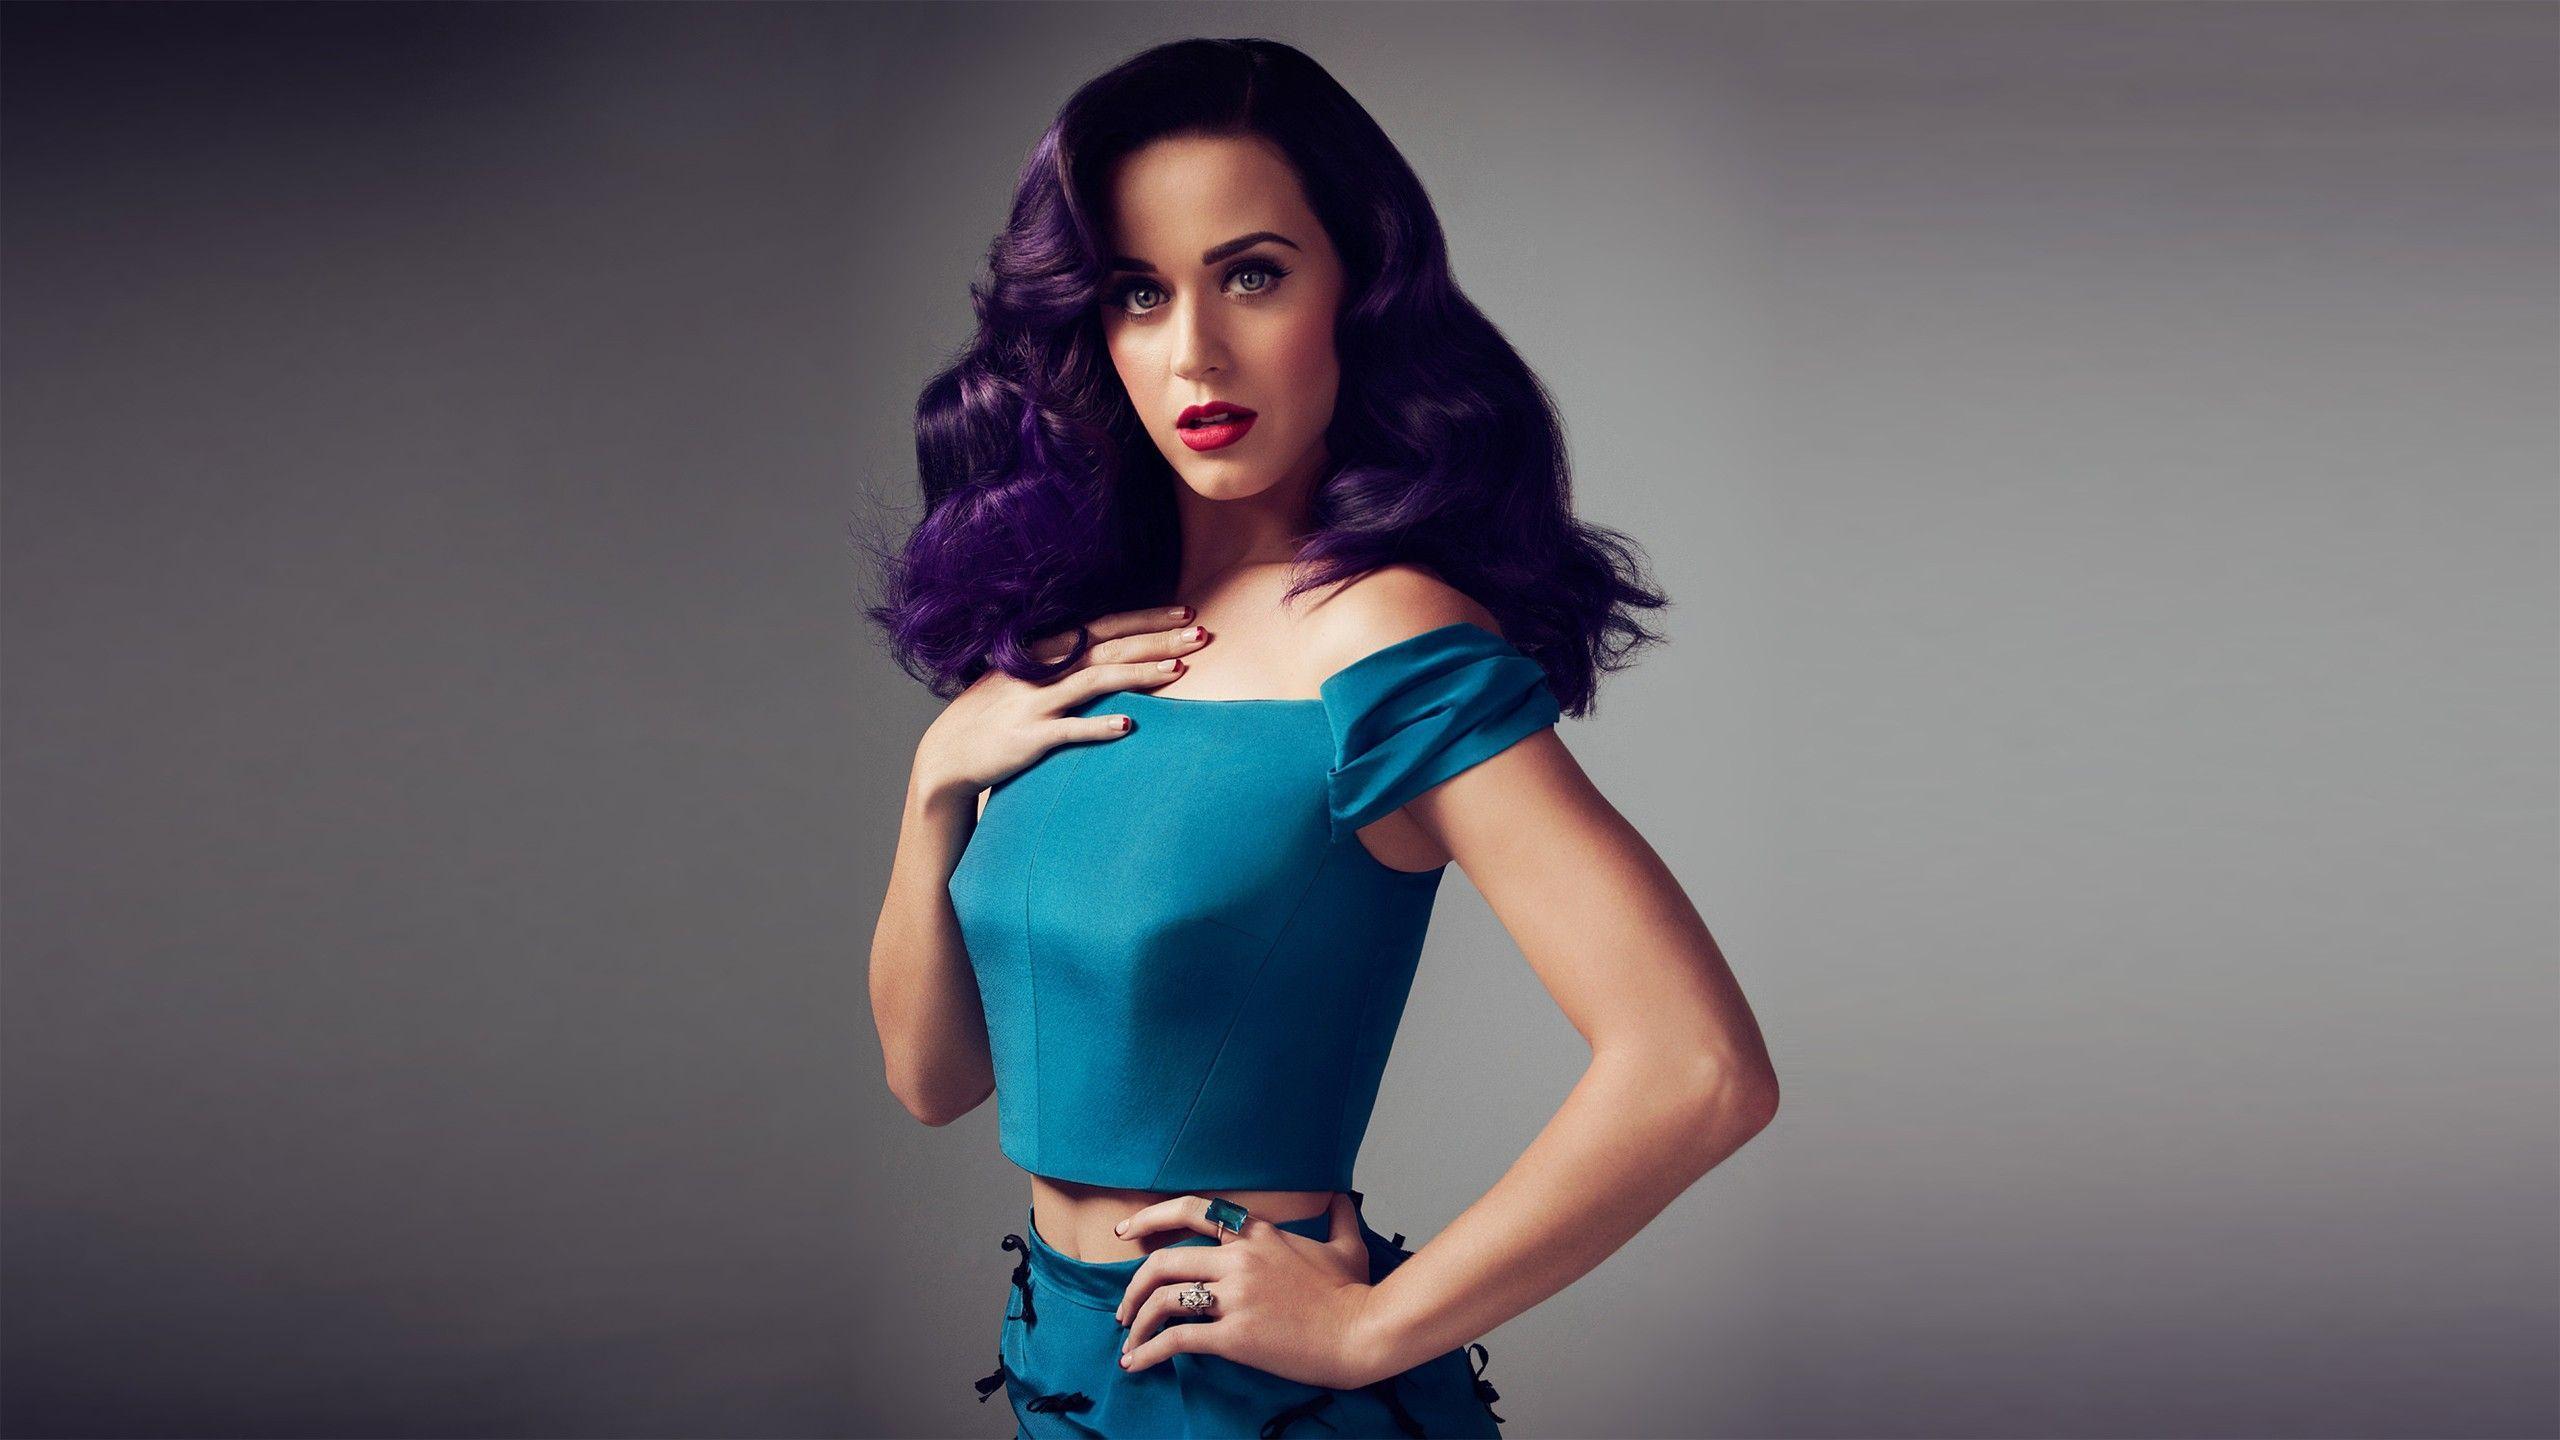 katy perry Wallpaper 2016 8 Around The World